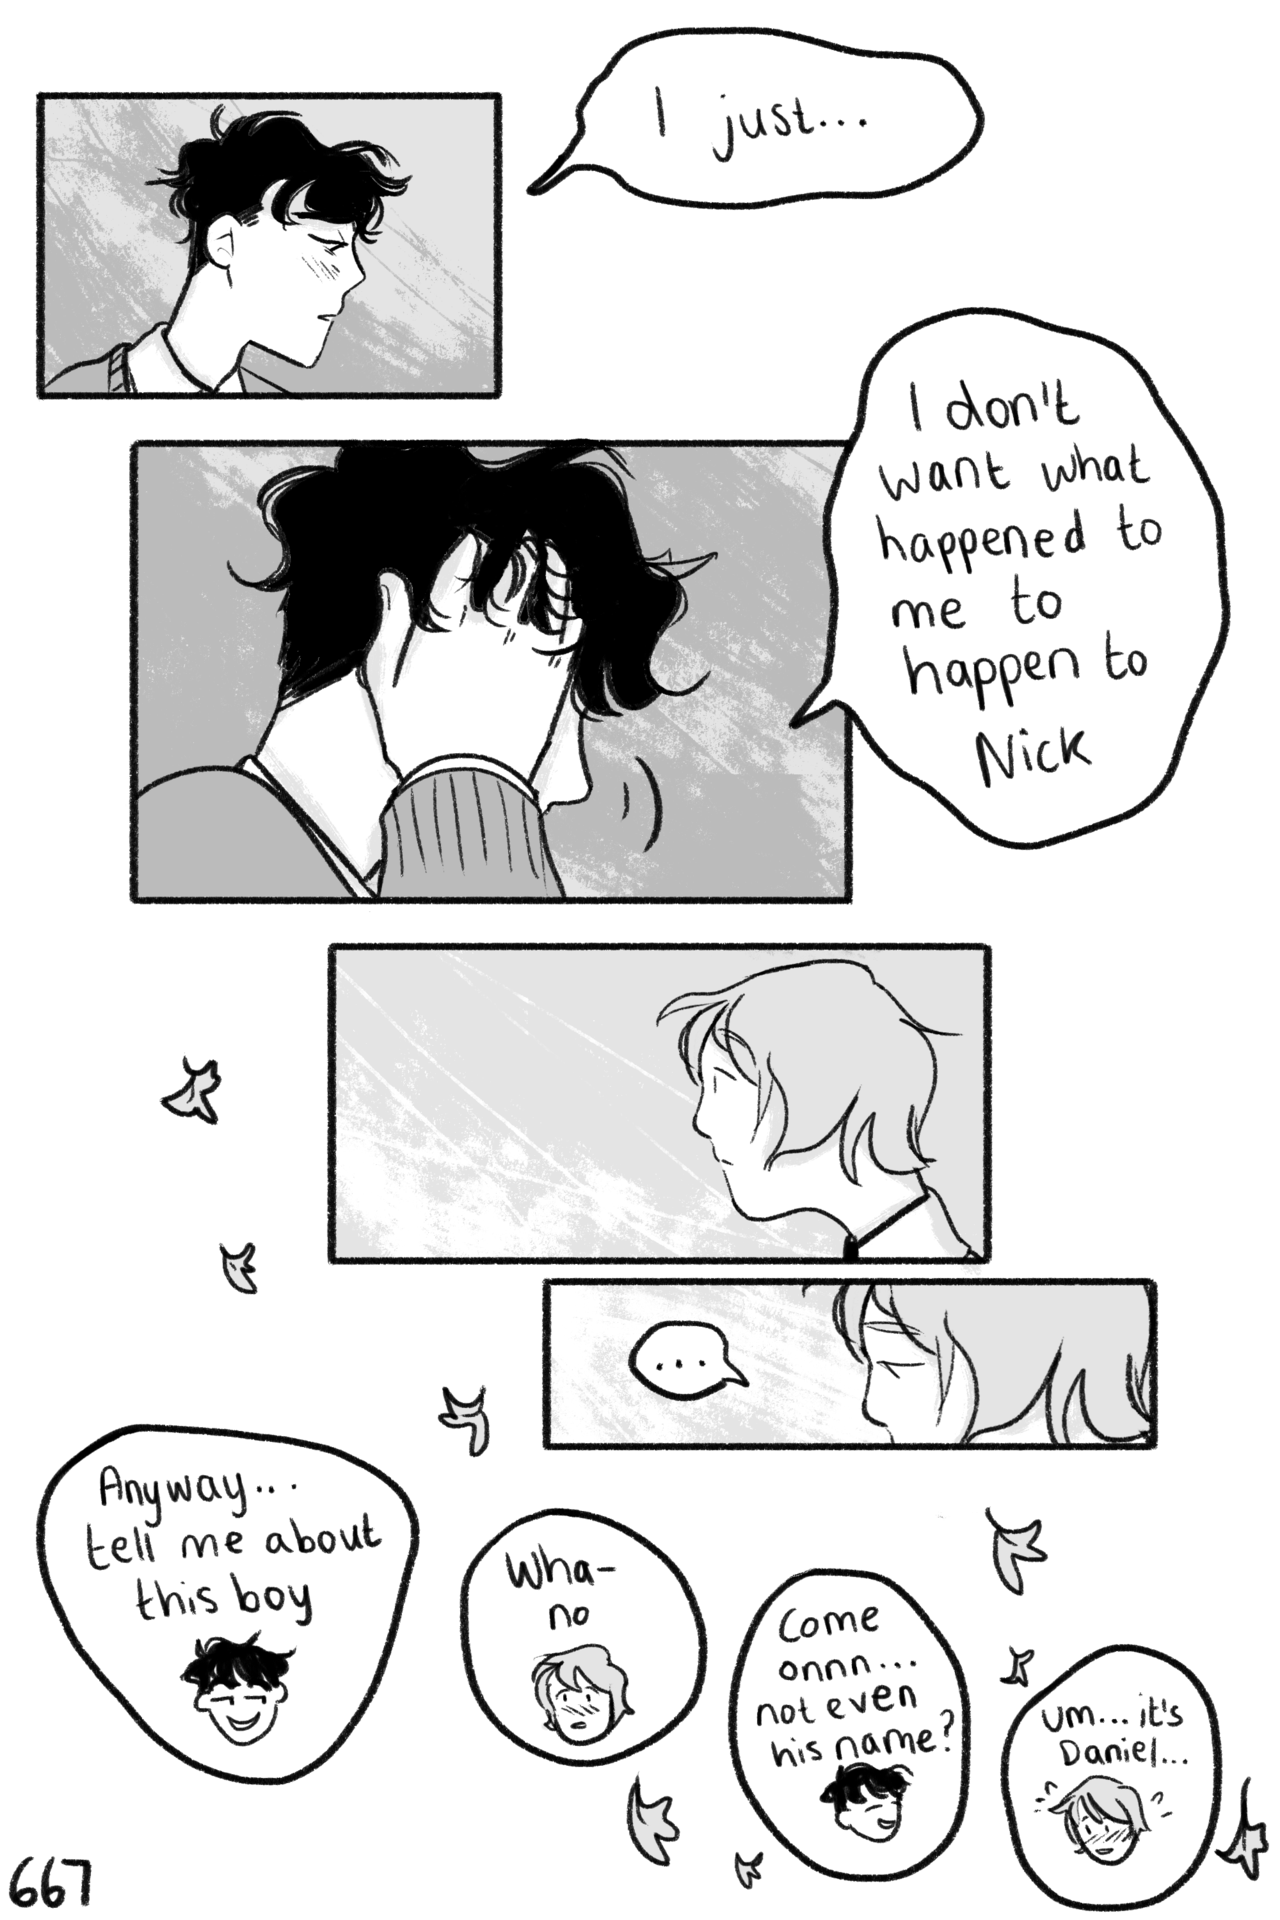 HEARTSTOPPER - chapter 4 - 13 some thoughts from Aled read from...